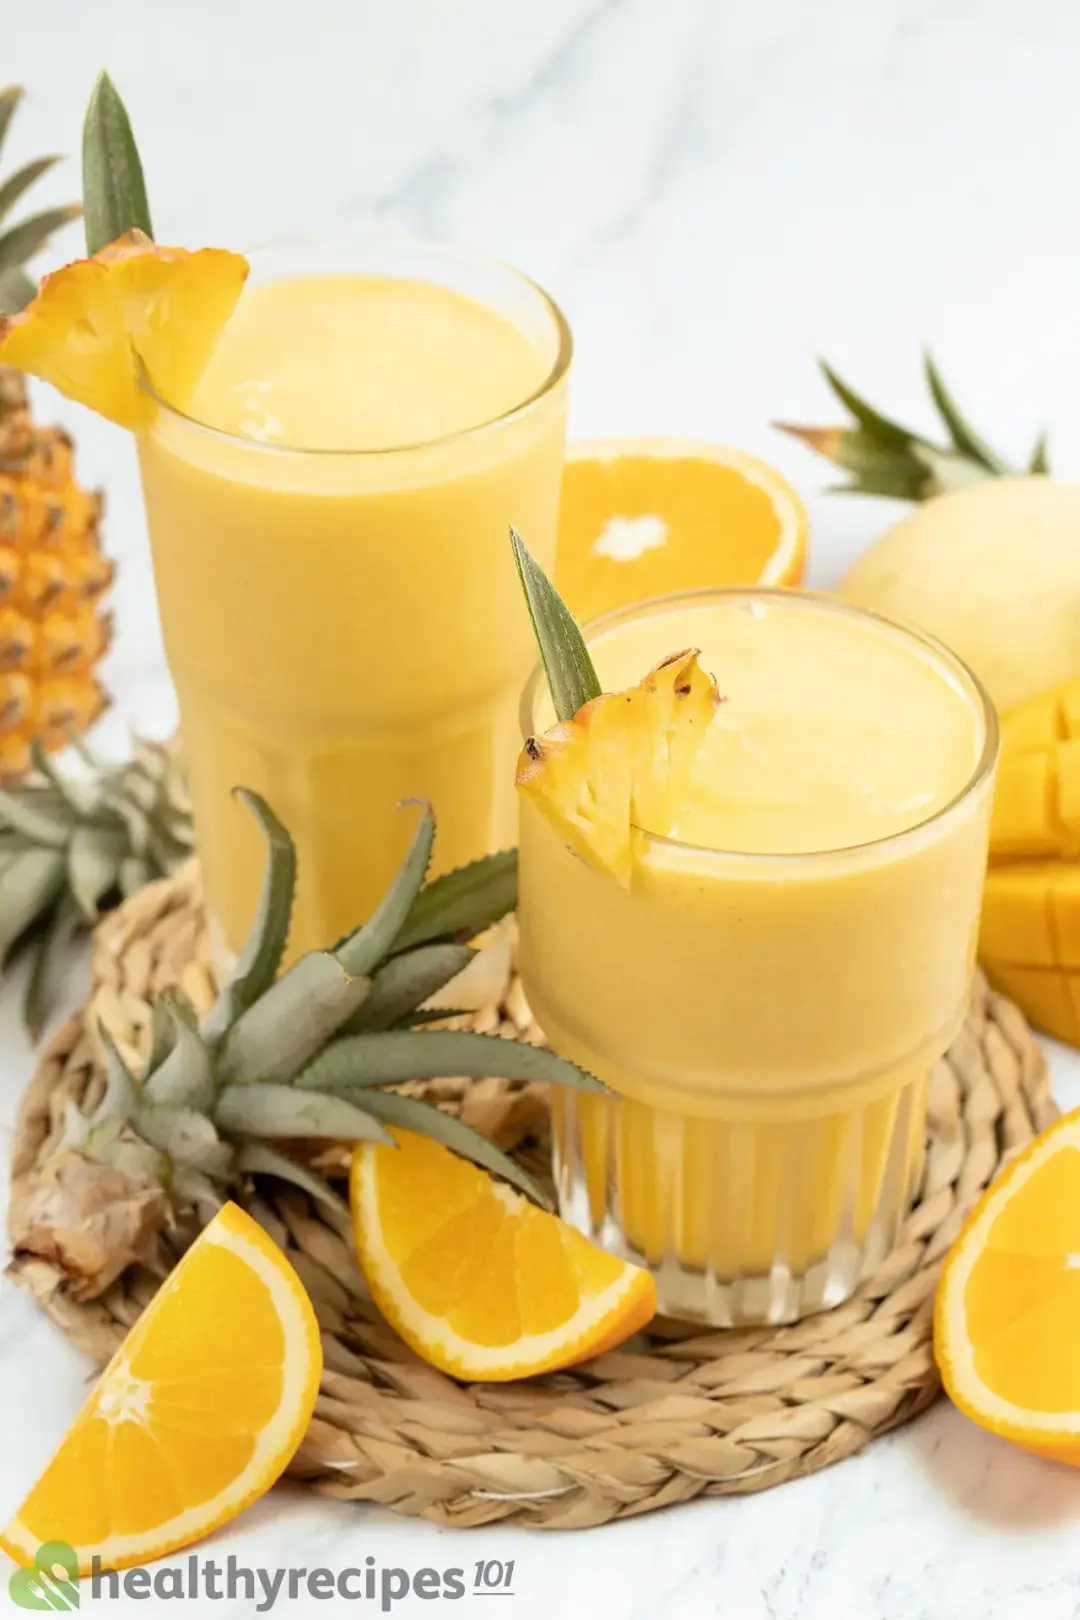  Two glasses of orange smoothie with orange wedges on the side and pineapple tops as garnishes